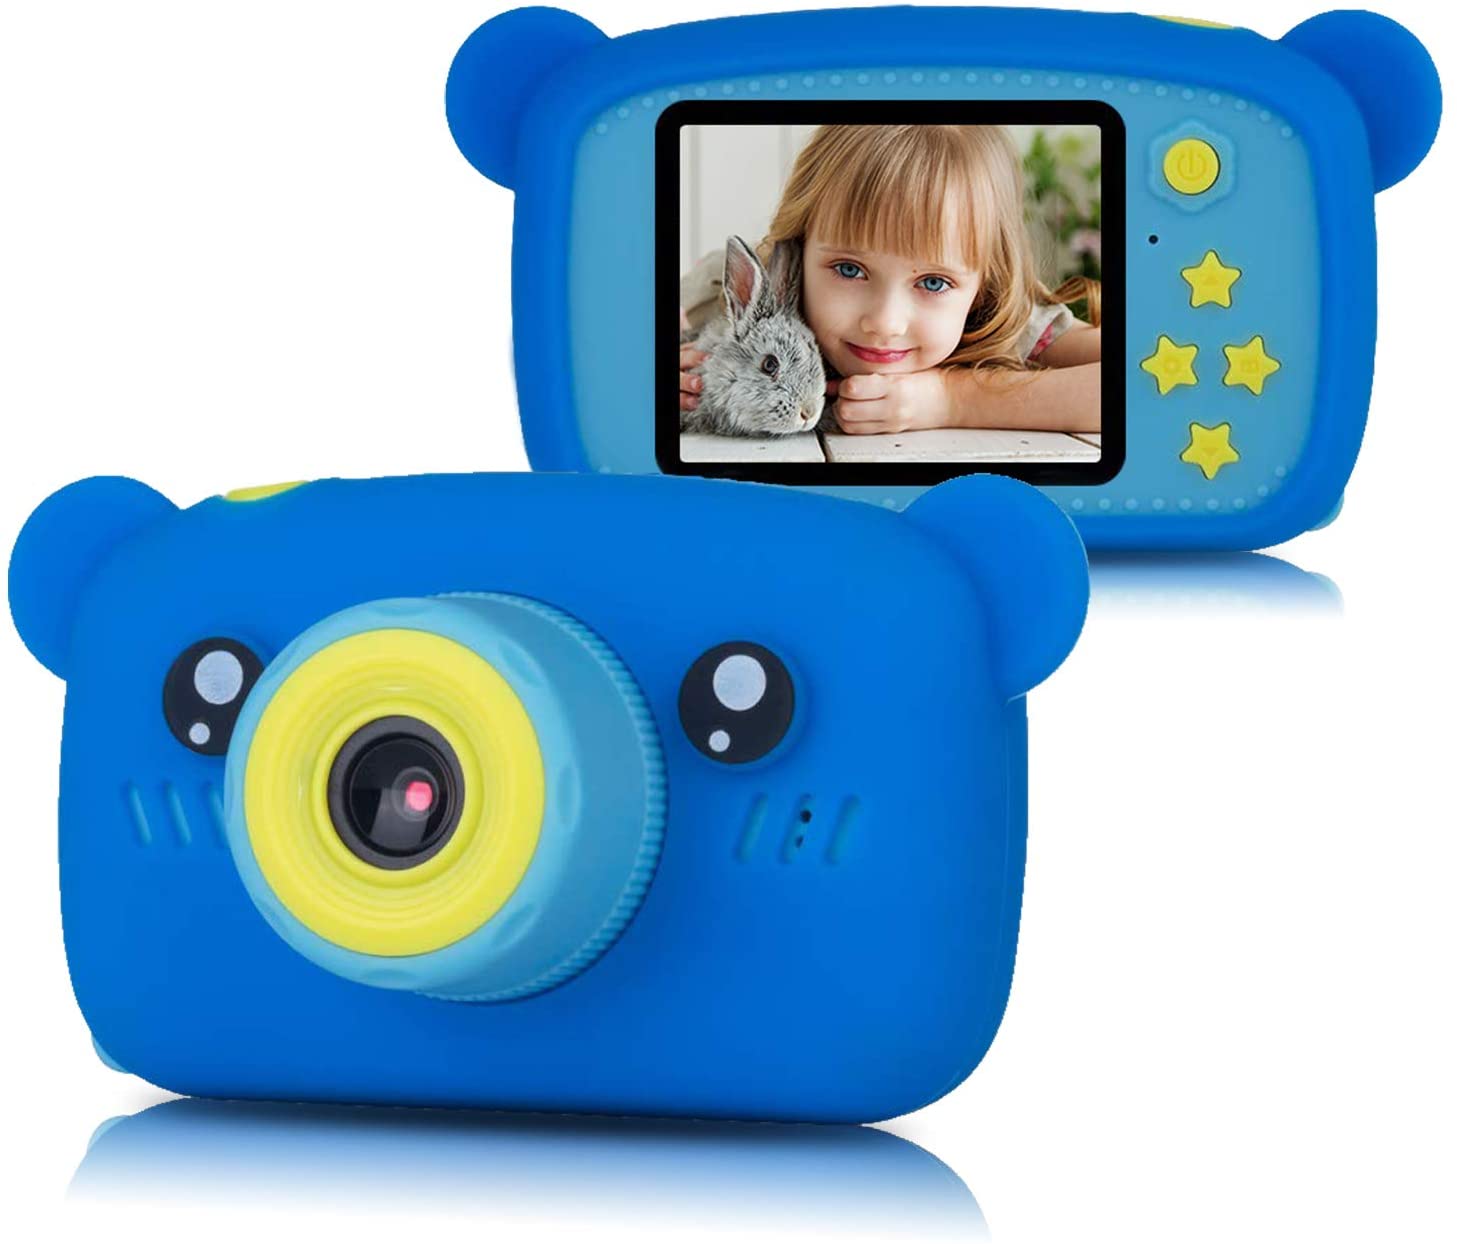 HD 1080P Digital Camera with VIDEO Recorder Camcorder and GAMEs Toys (Blue Bear)